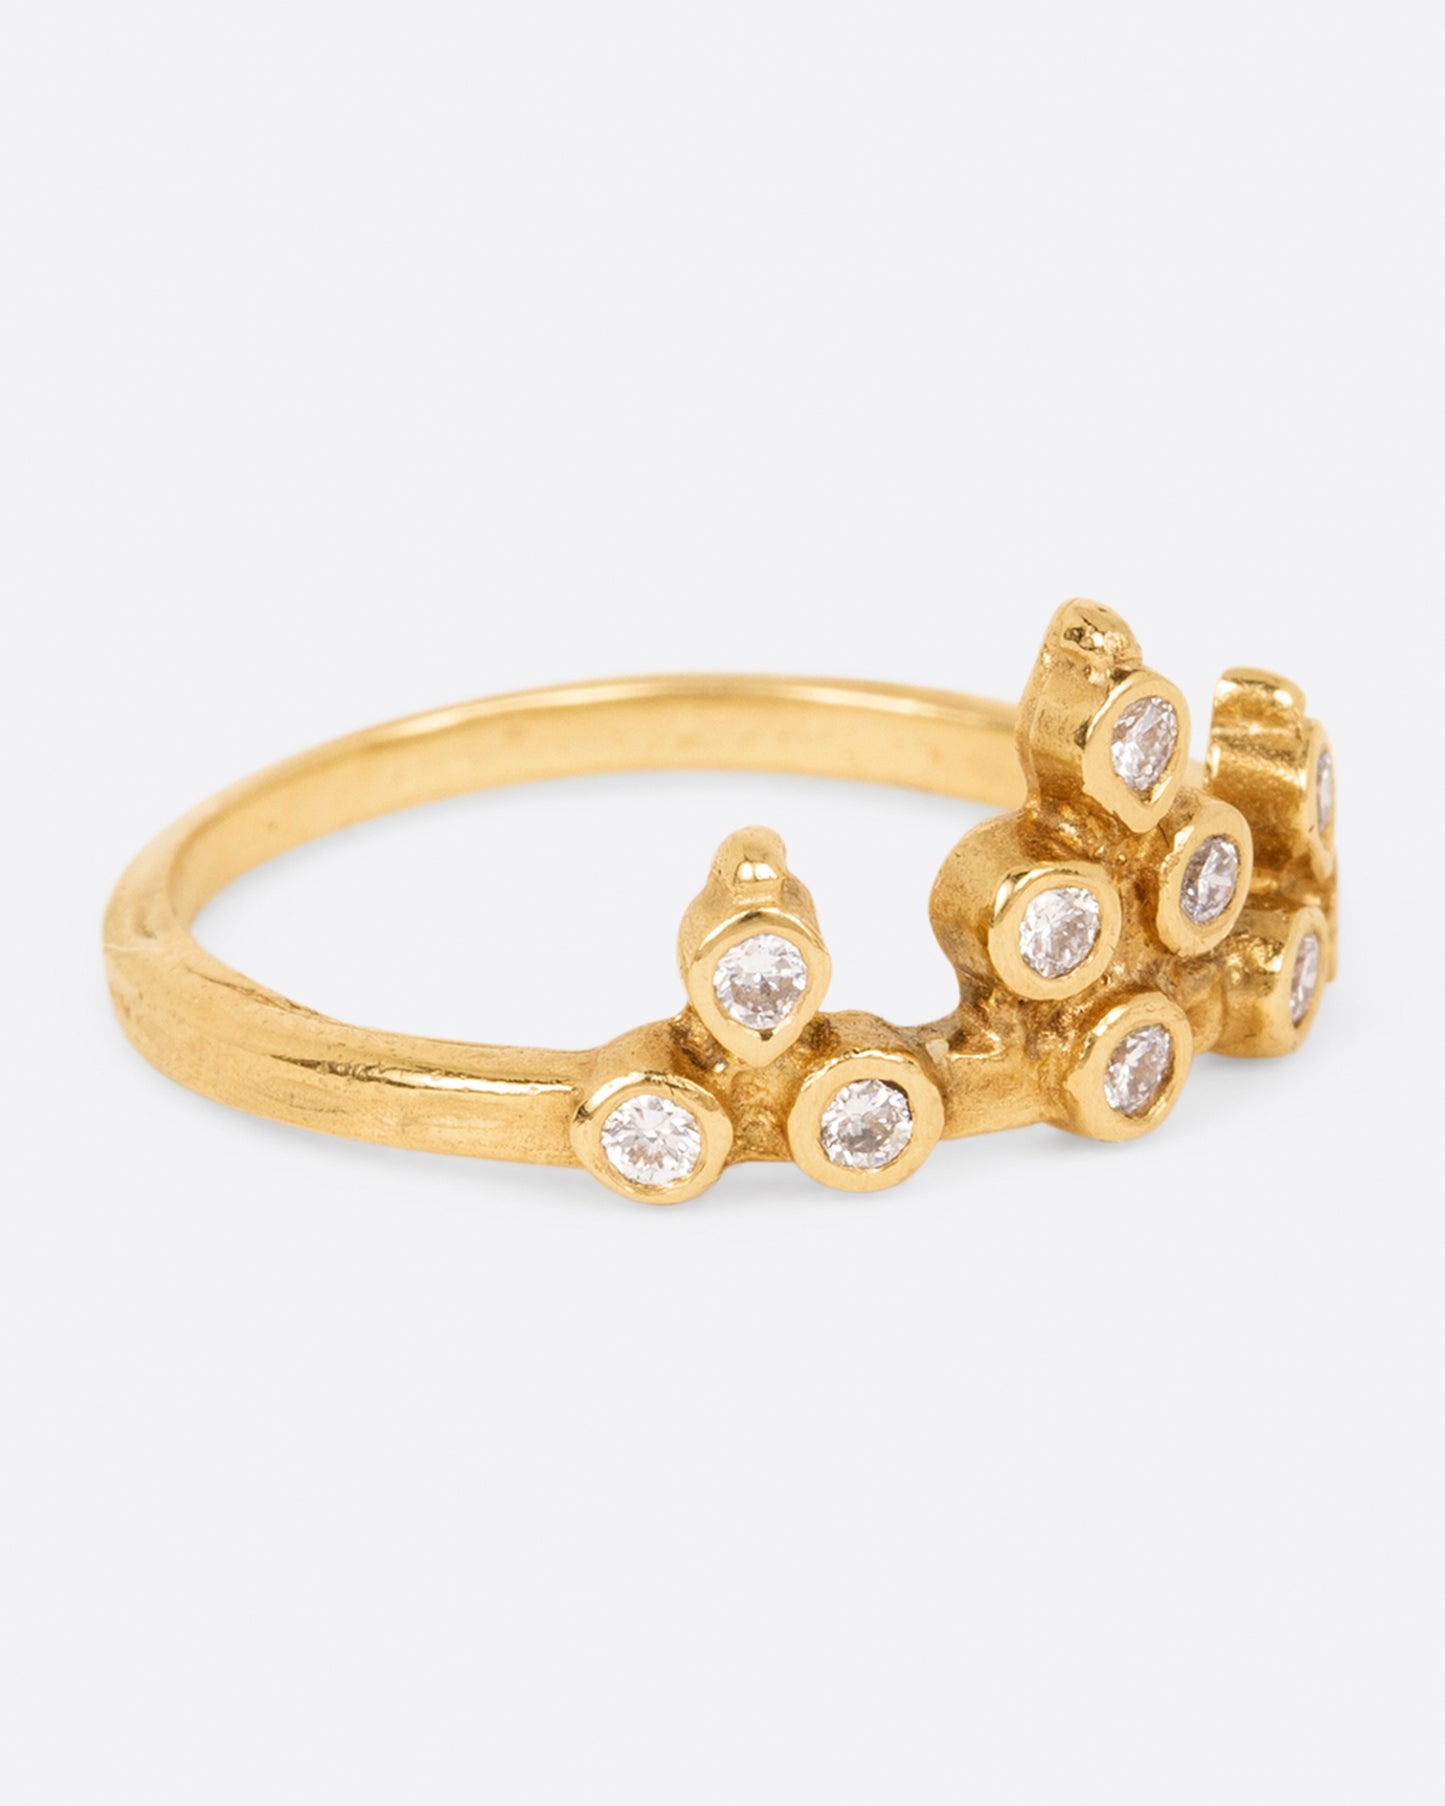 A yellow gold crown ring with round white diamonds, shown from the side.